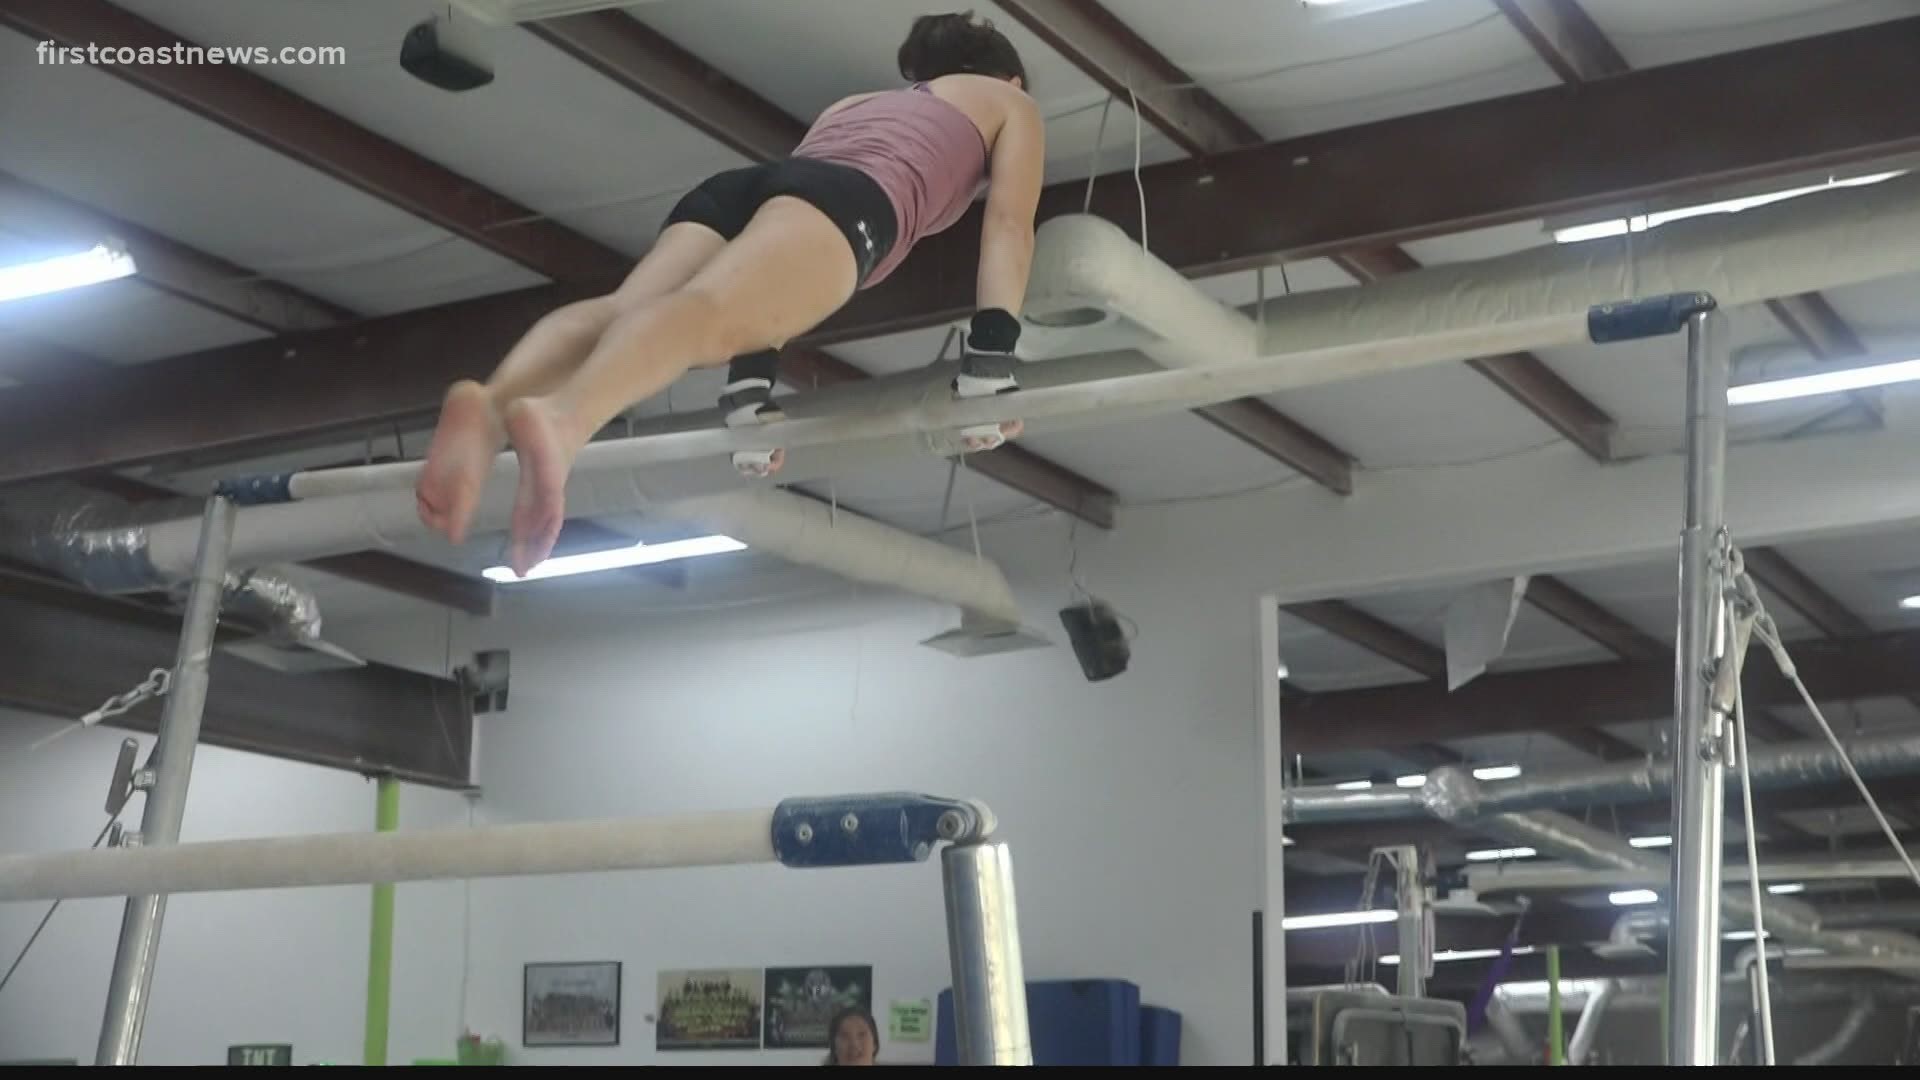 There are a lot of classes and camps for kids to learn gymnastics, but what if you’re an adult and you would like to try out the uneven bars or balance beam?